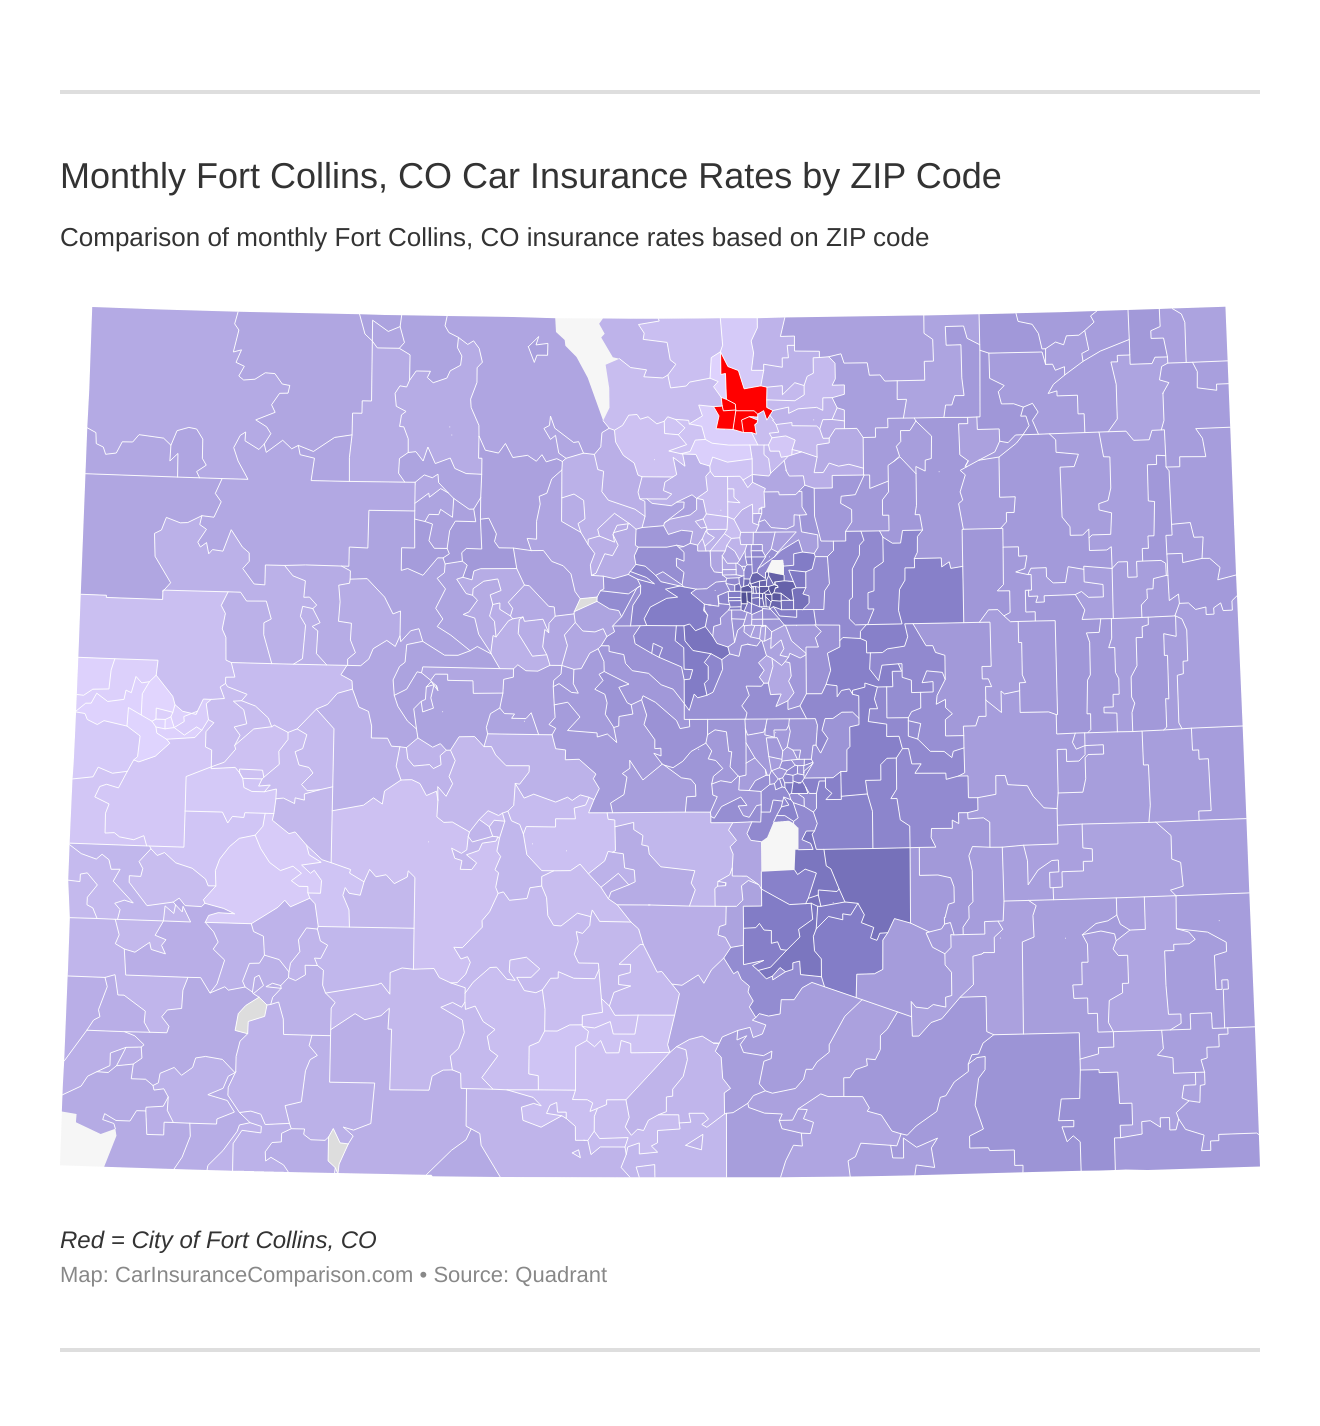 Monthly Fort Collins, CO Car Insurance Rates by ZIP Code